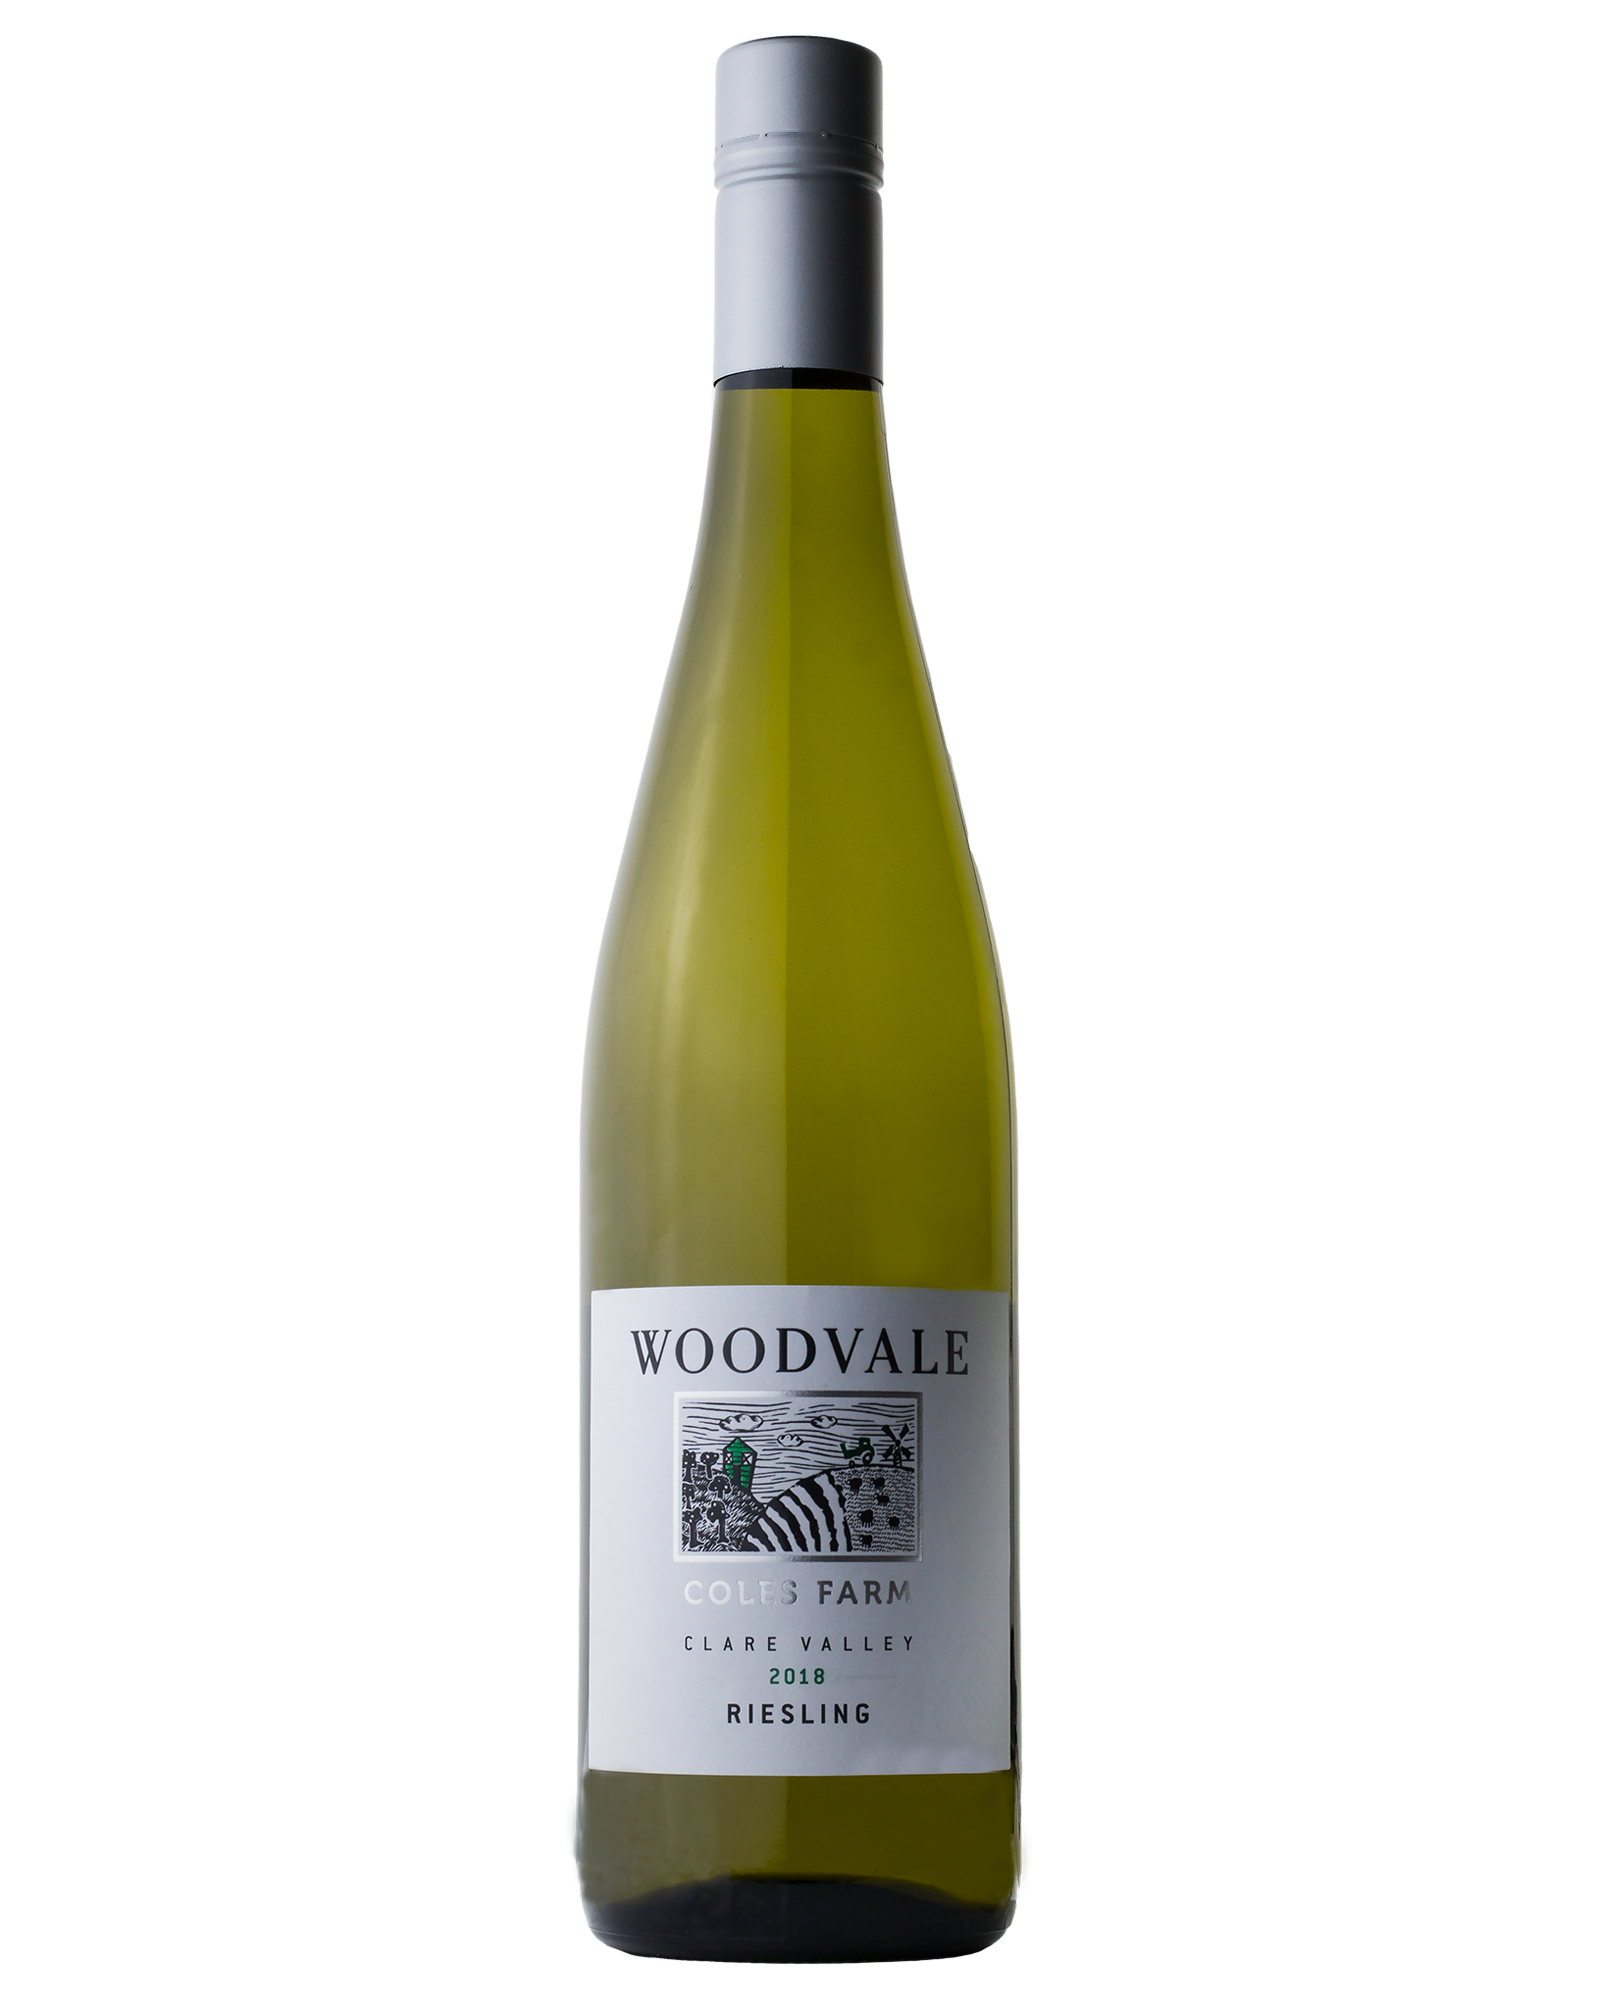 Woodvale Coles Farm Clare Valley Riesling 2018